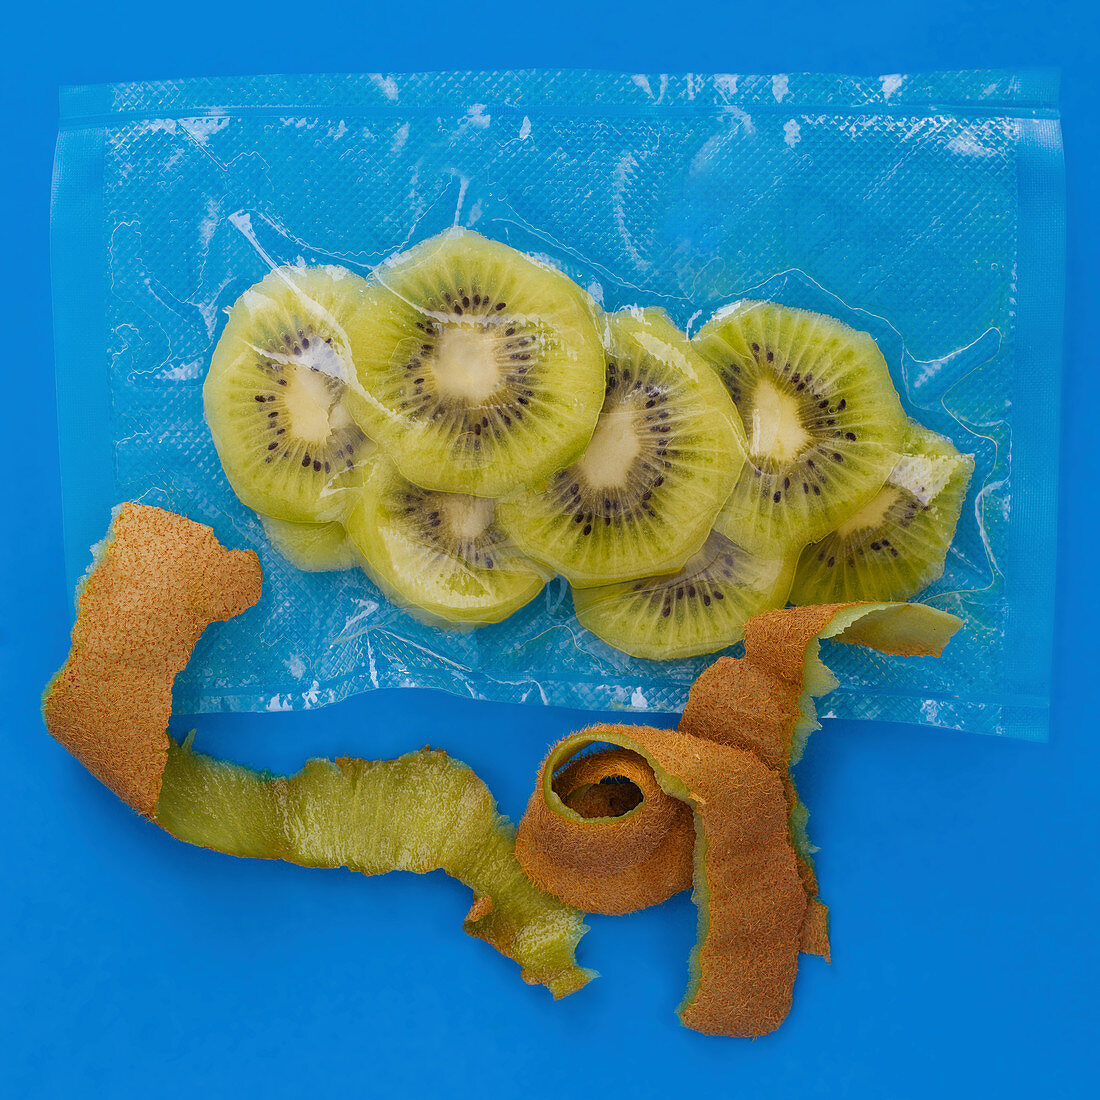 Kiwi slices vacuum-packed in a plastic bag